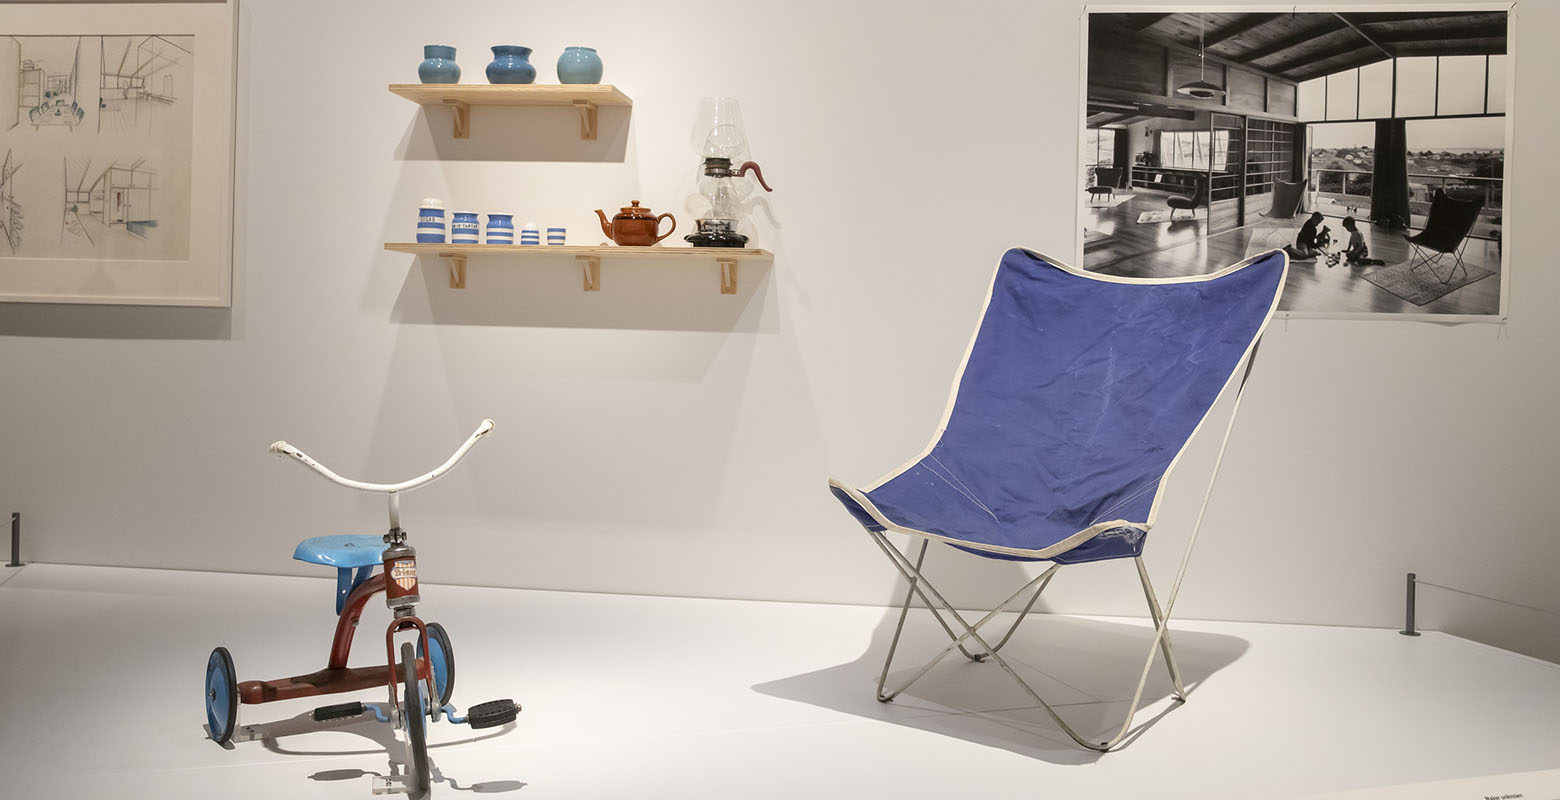 Photo of exhibition view. On a raised platform sits a red and blue trike and a blue chair. On the wall is shelving holding a coffee carafe, a tea pot, and a selection of jars. On the wall is a photo of the interior of a modernist house